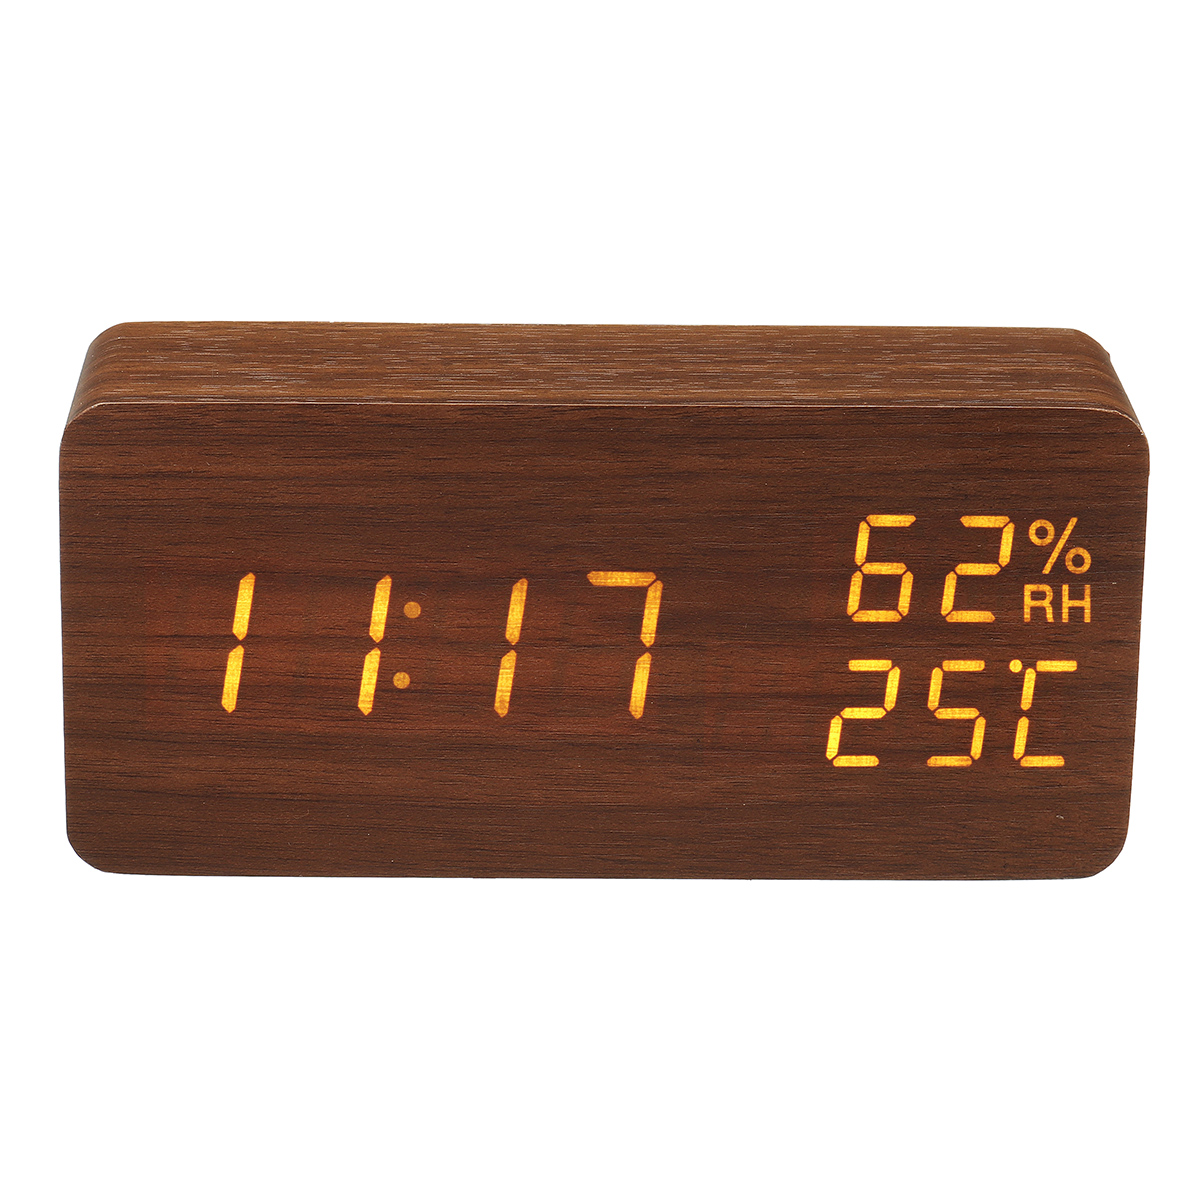 Modern-Wooden-Wood-Digital-Thermometer-USB-Charger-LED-Desk-Alarm-Wireless-Clock-1739446-9